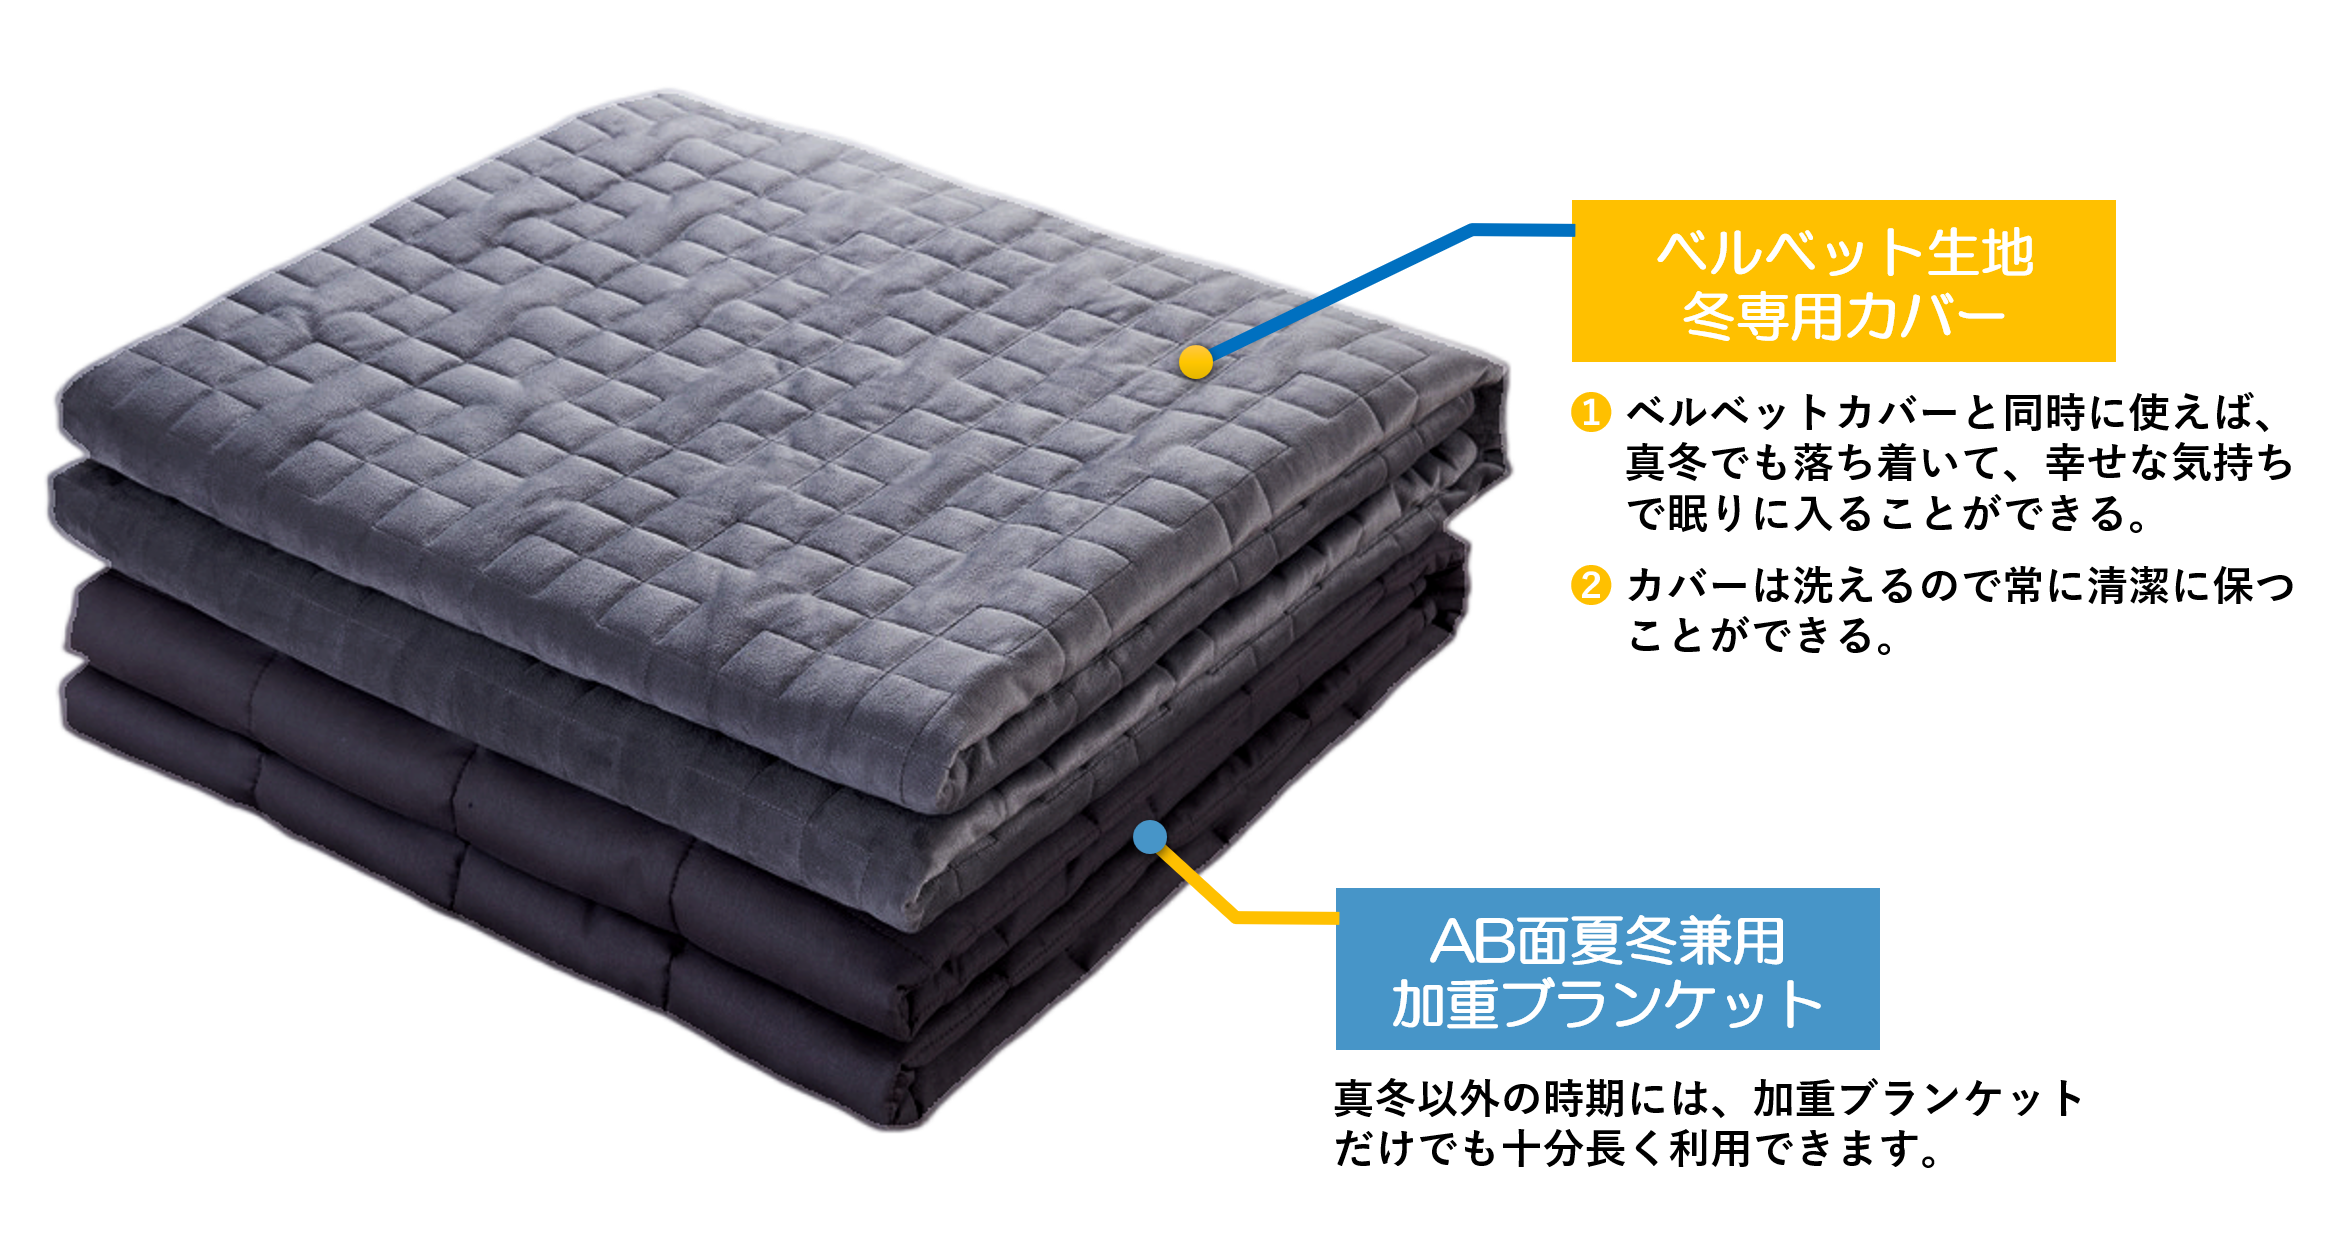 [The key to a good night's sleep] "DREAM HUG" is a mysterious weighted blanket that feels like being hugged!